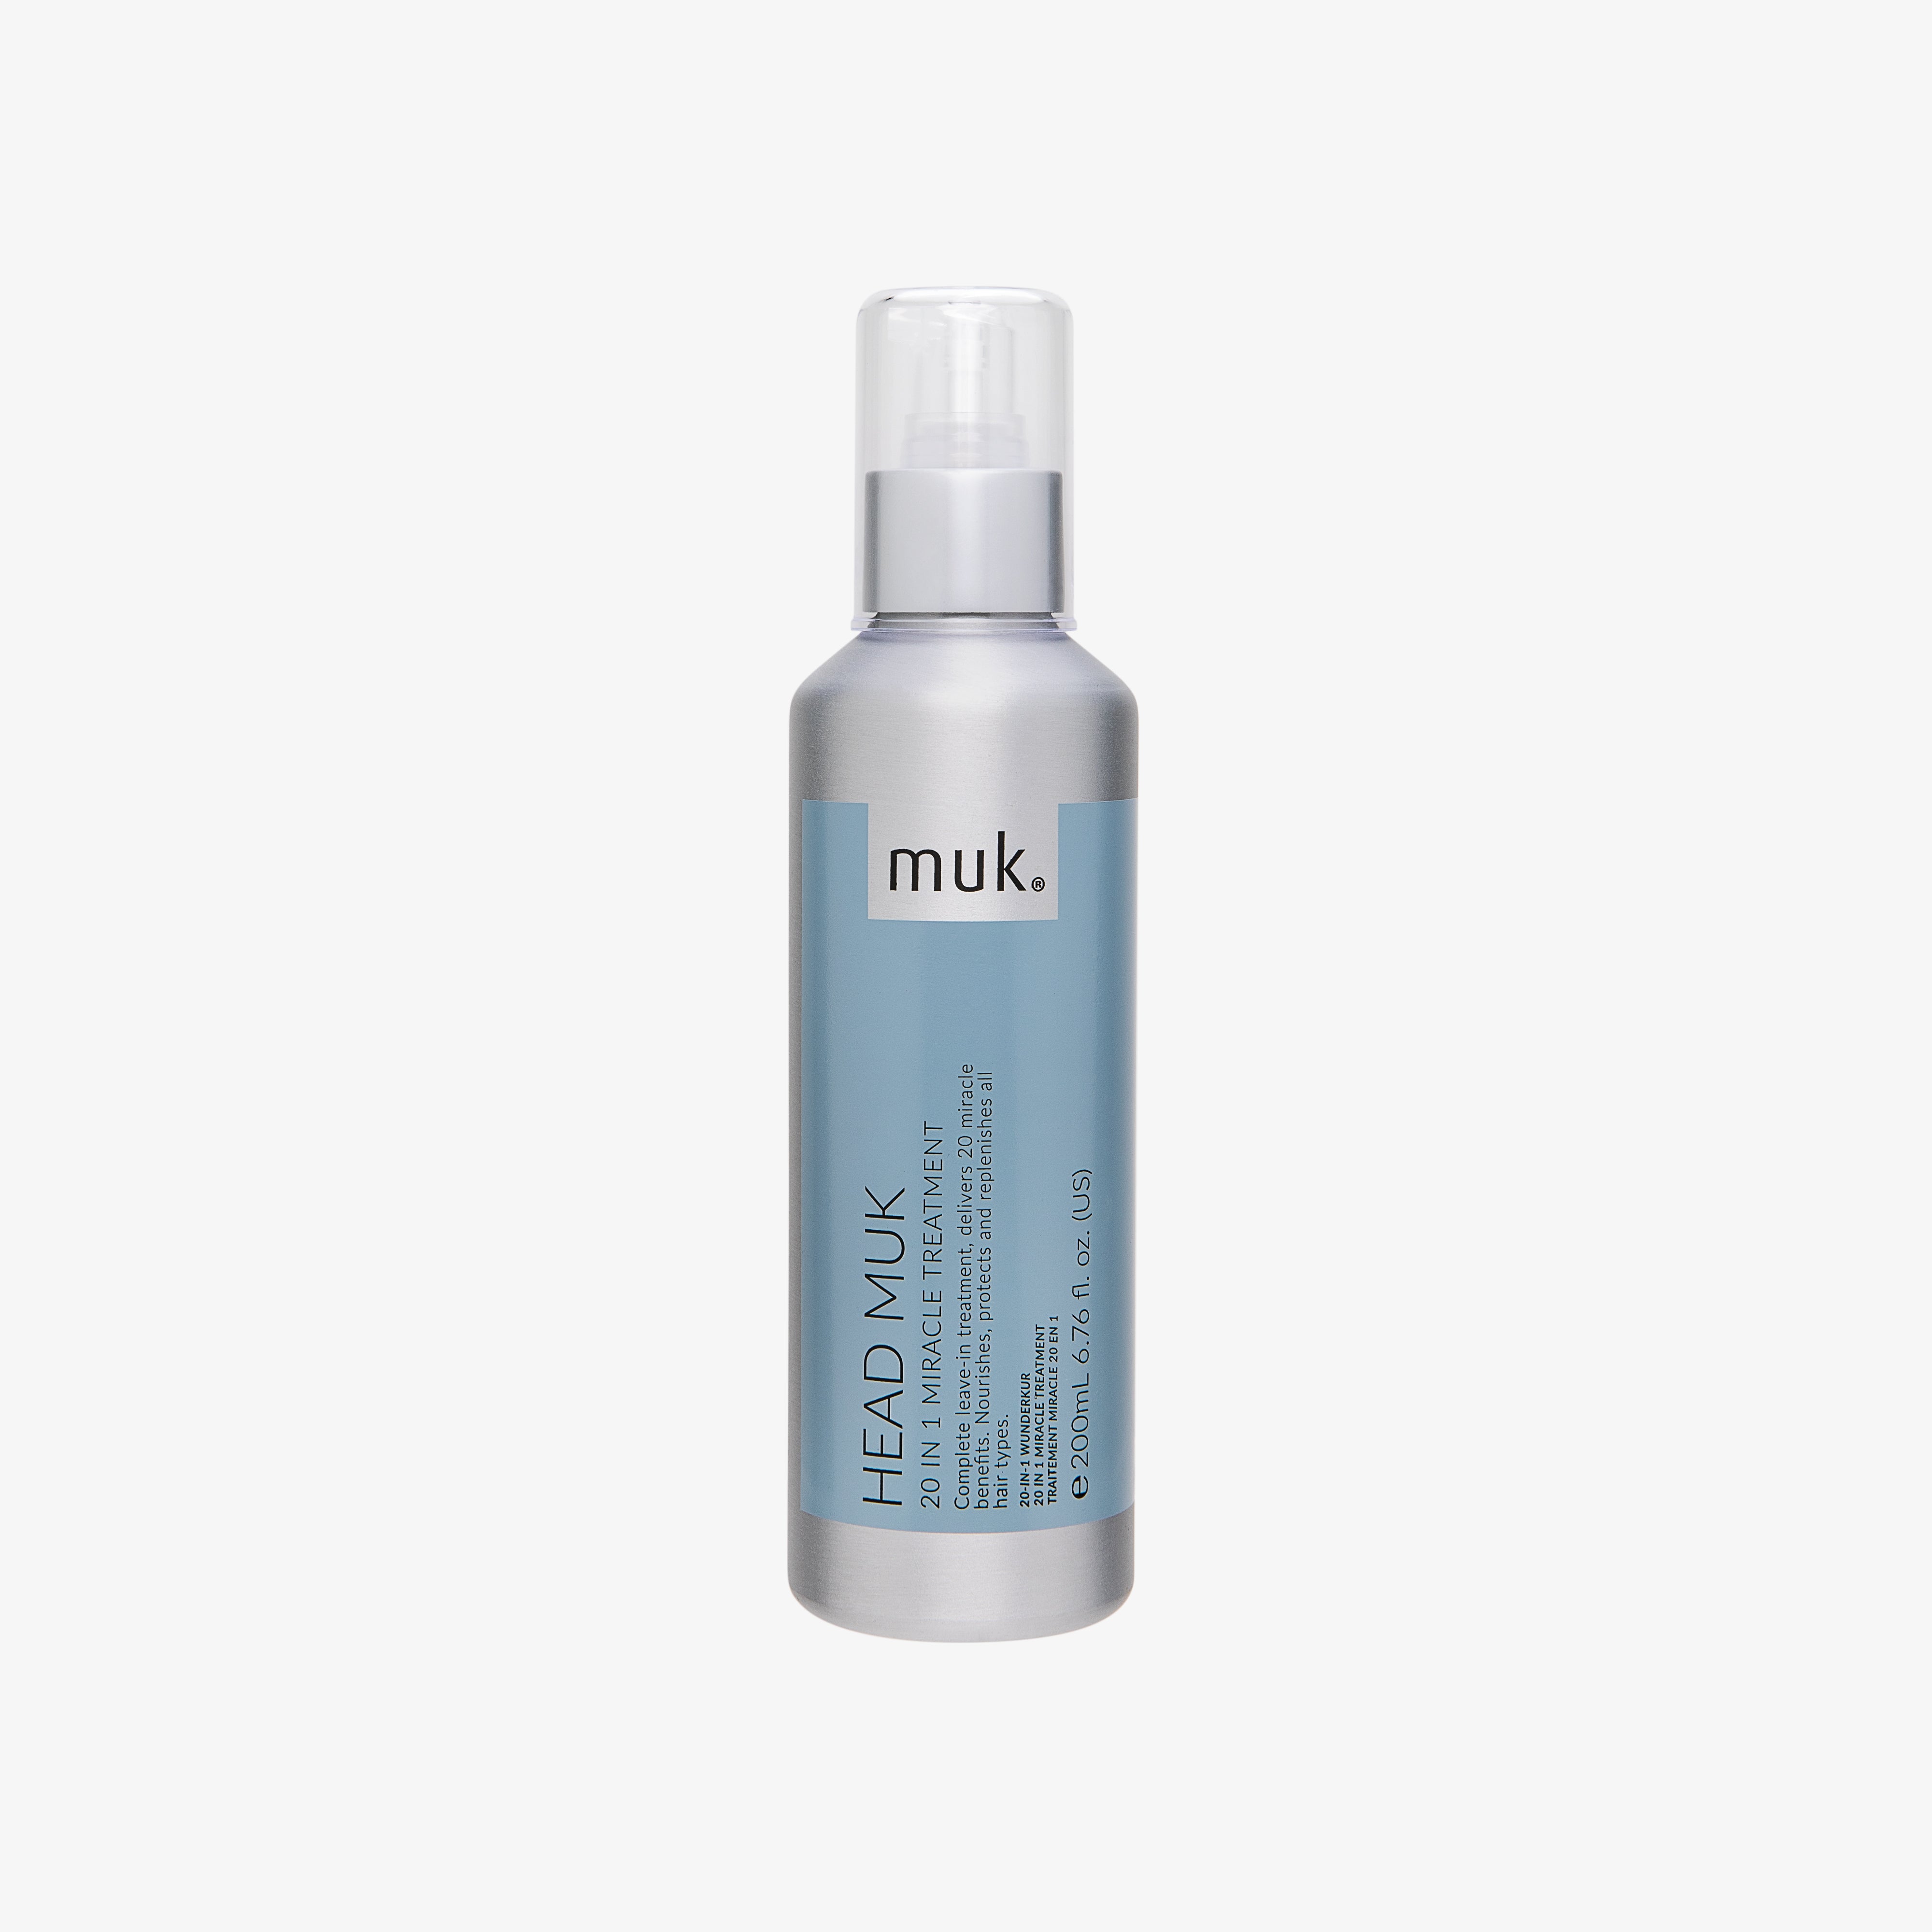 HEAD MUK 20 IN 1 MIRACLE TREATMENT